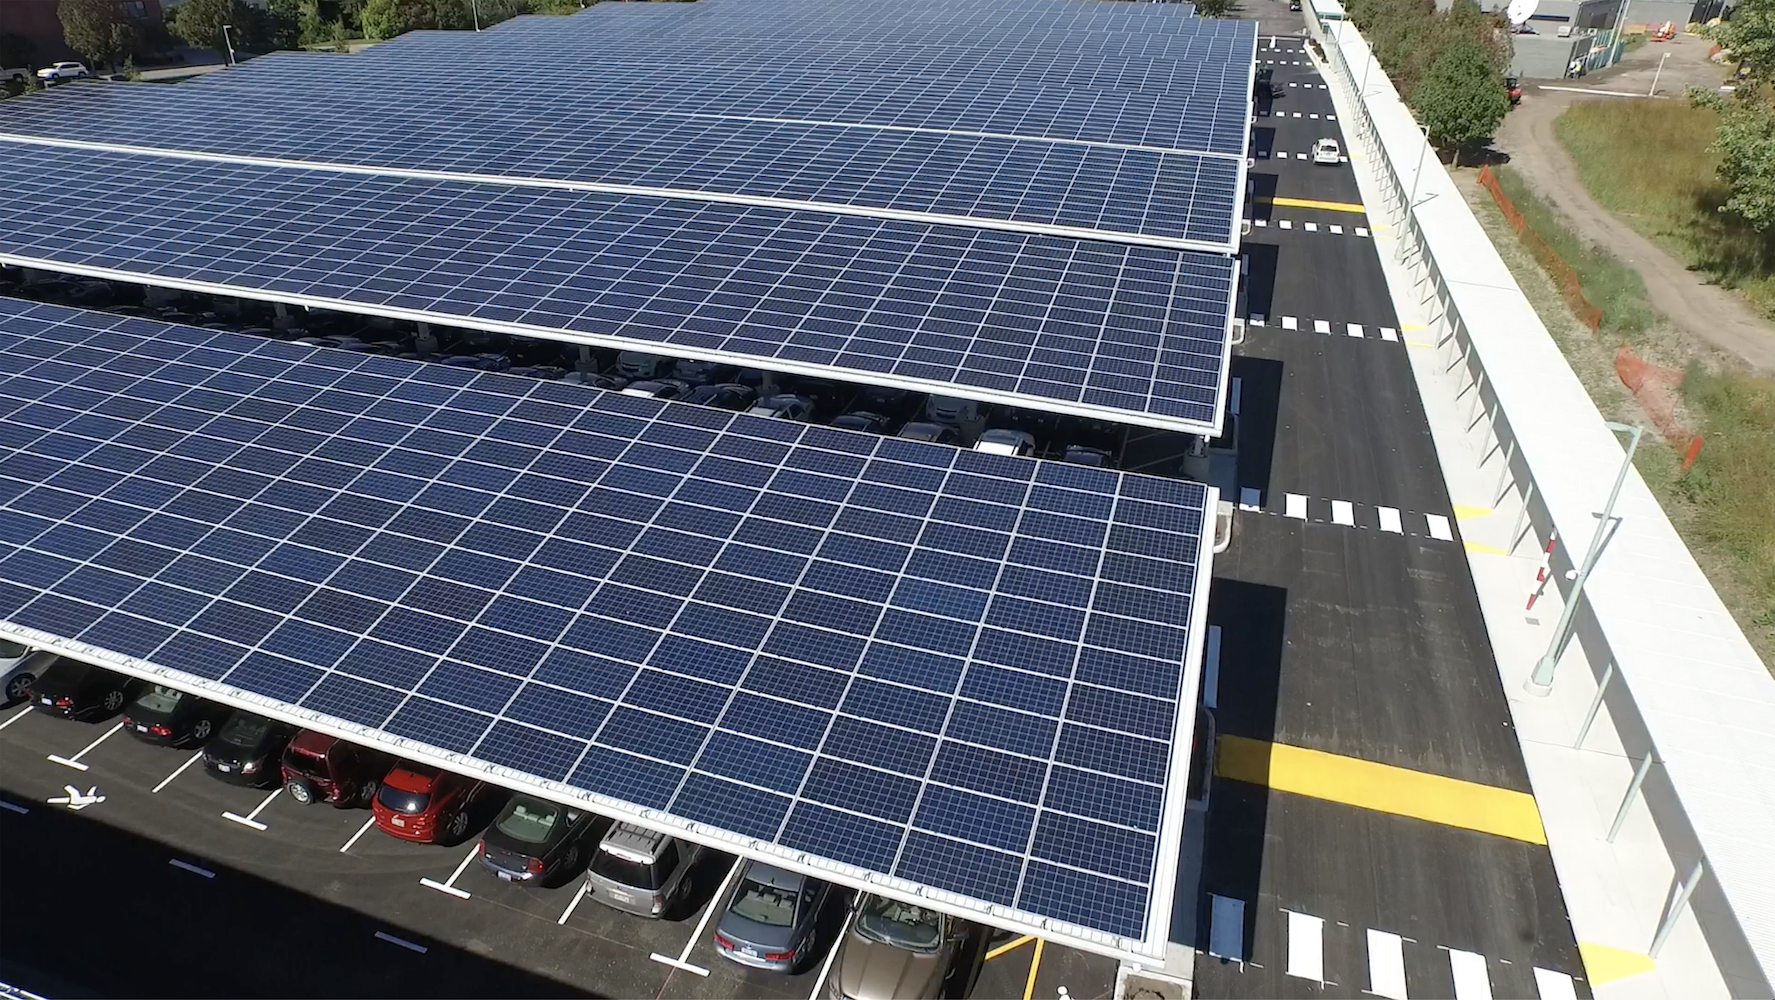 owens corning headquarters Solar Array over parking lot